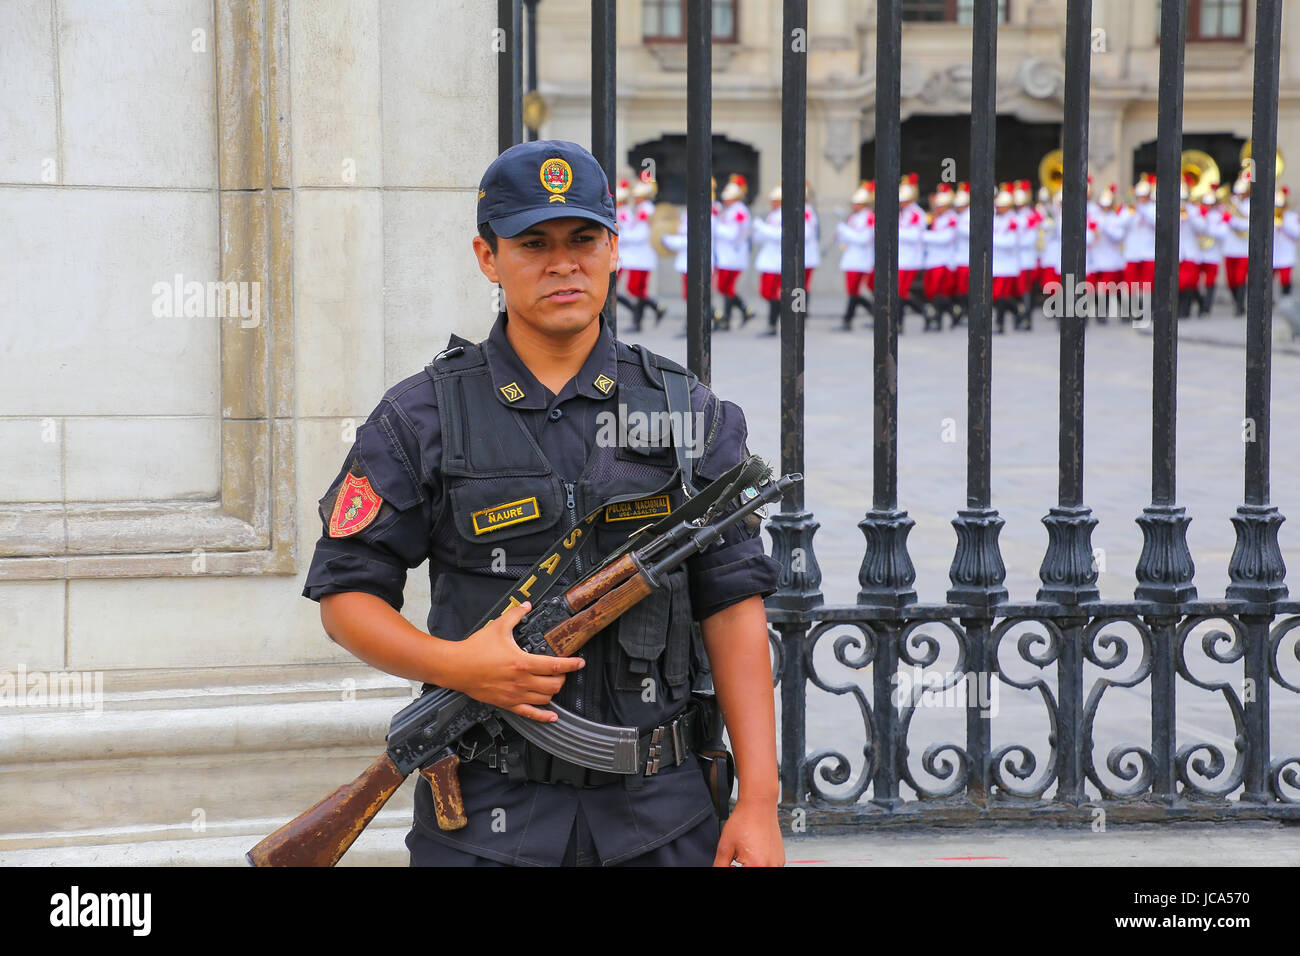 Policeman standing near Government Palace in Lima, Peru. Peruvian National Police is one of the largest police forces in South America. Stock Photo